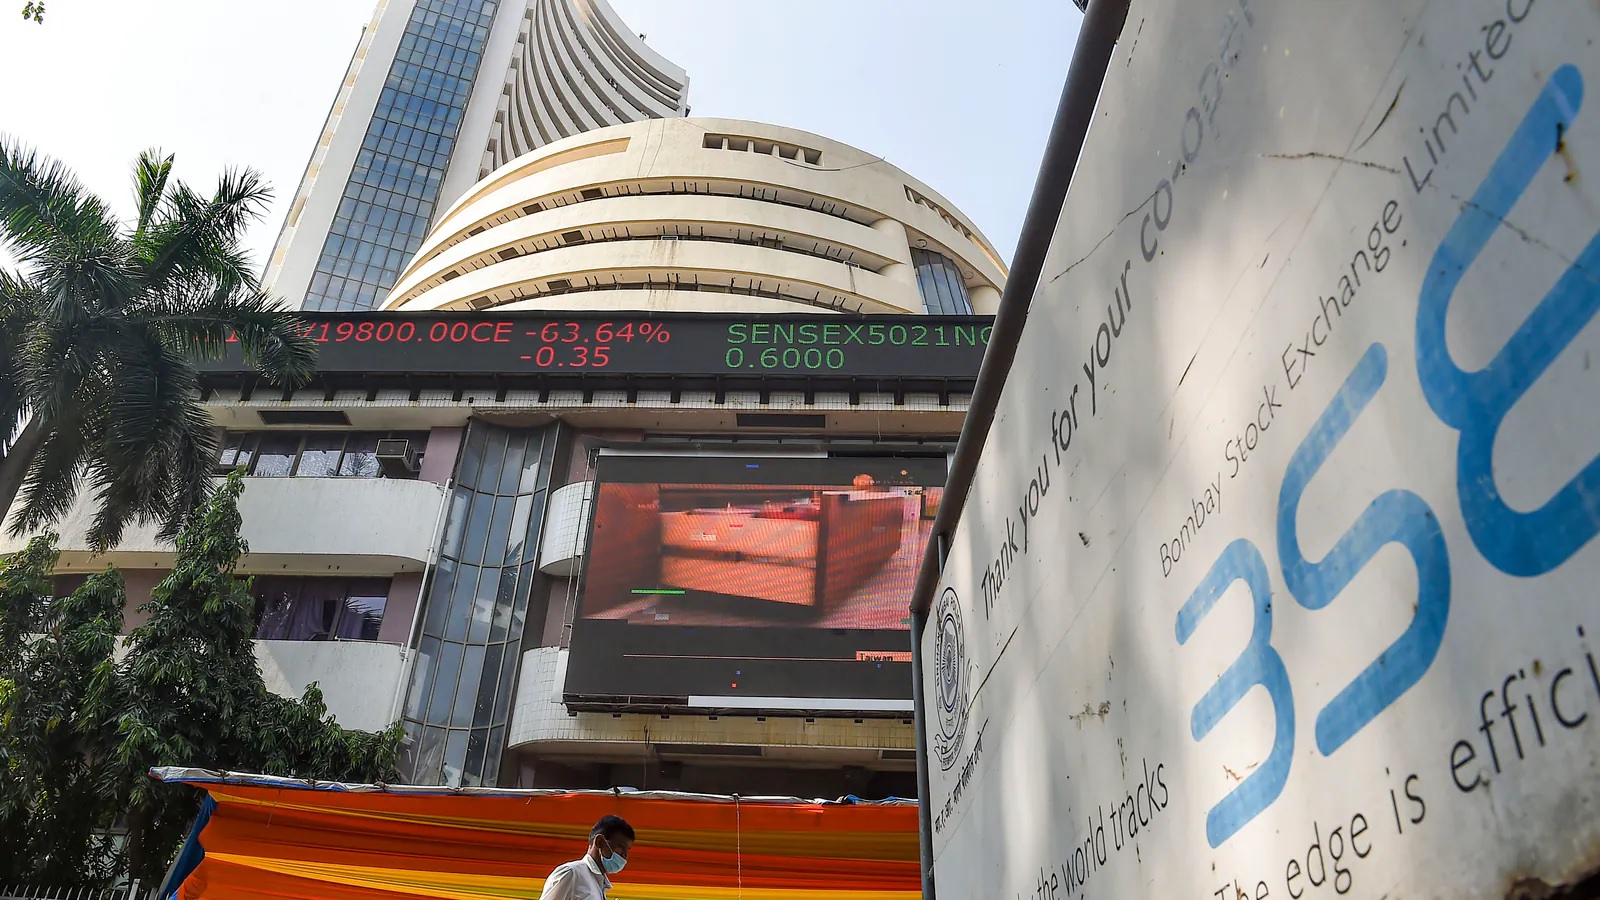 Sensex closes at 1457 points and Nifty closes at 15774! The first day of the week was off